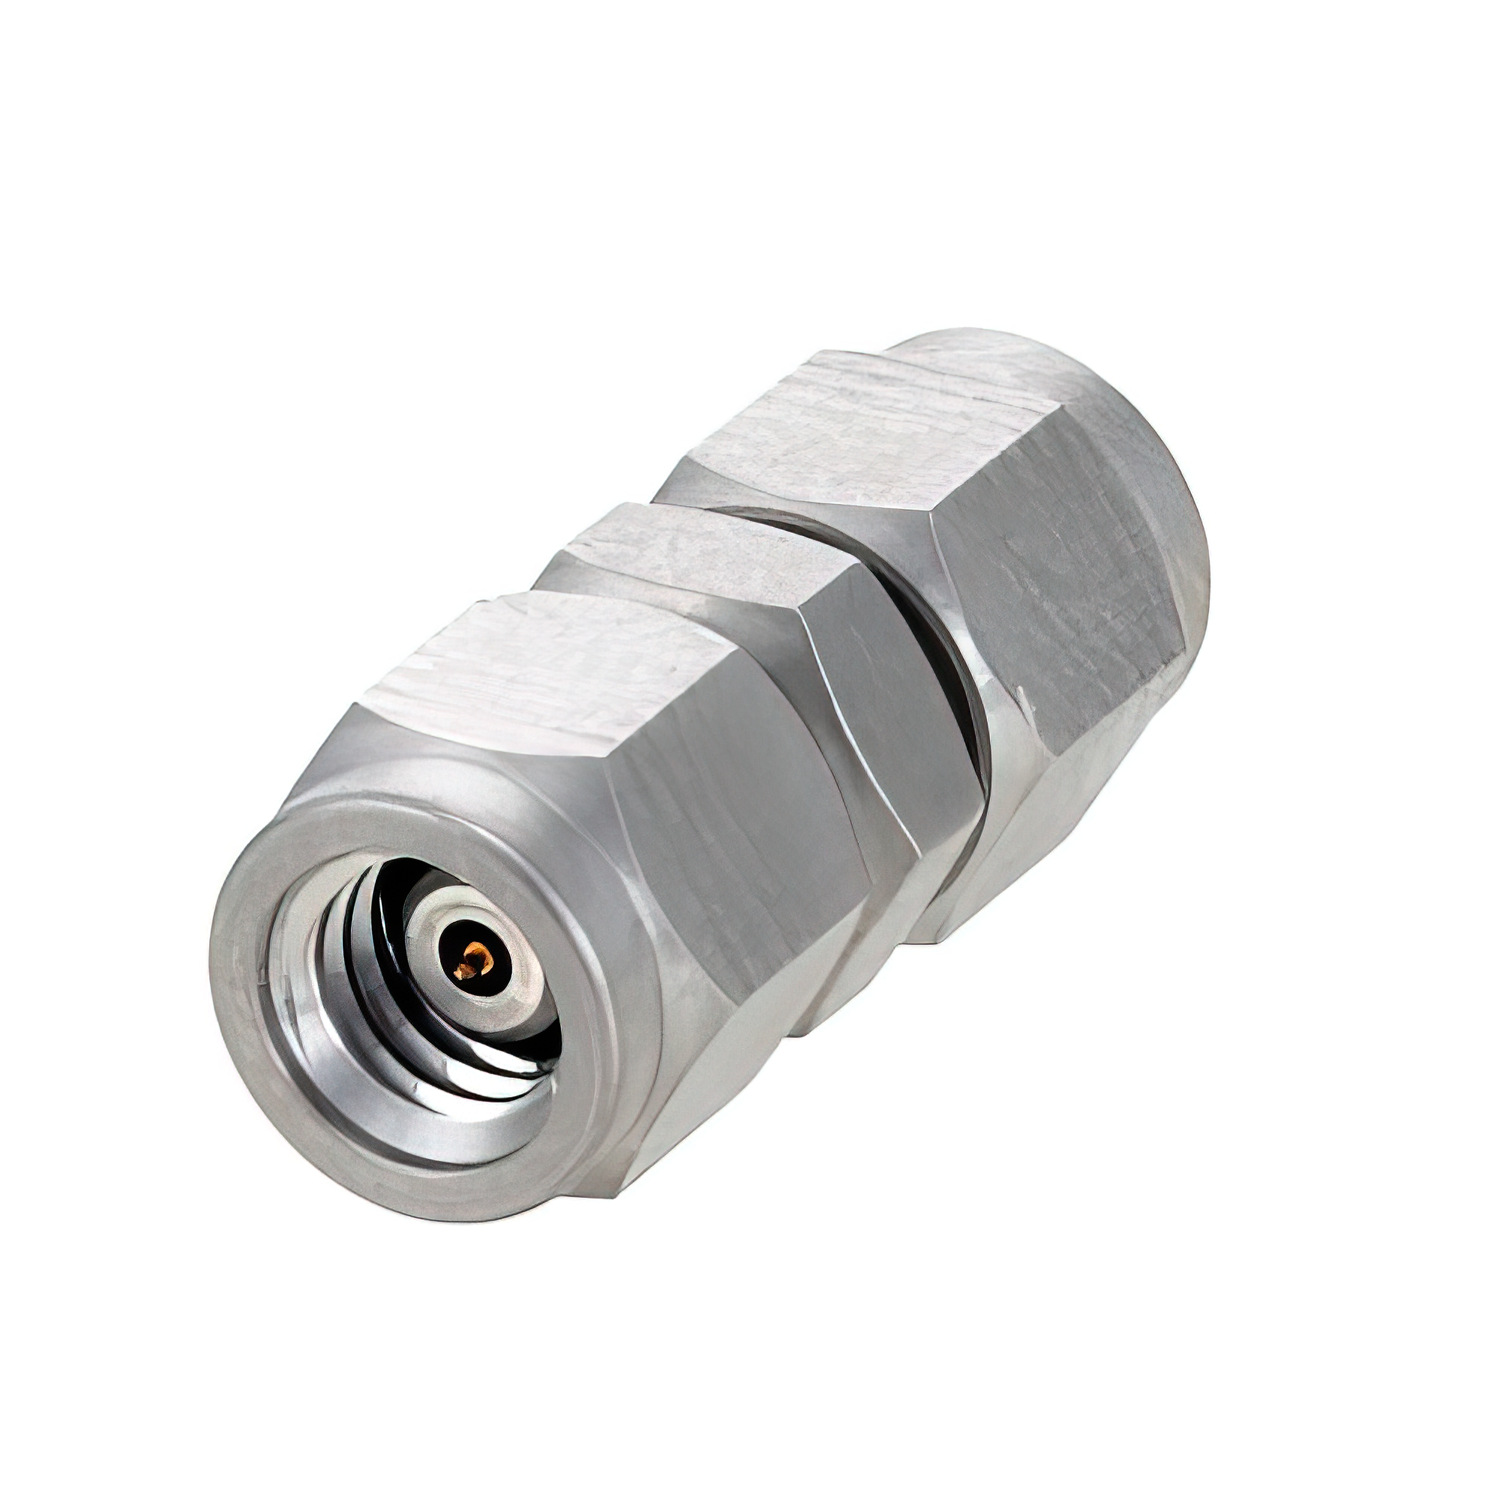 1.0mm male to 1.0mm male adapter1